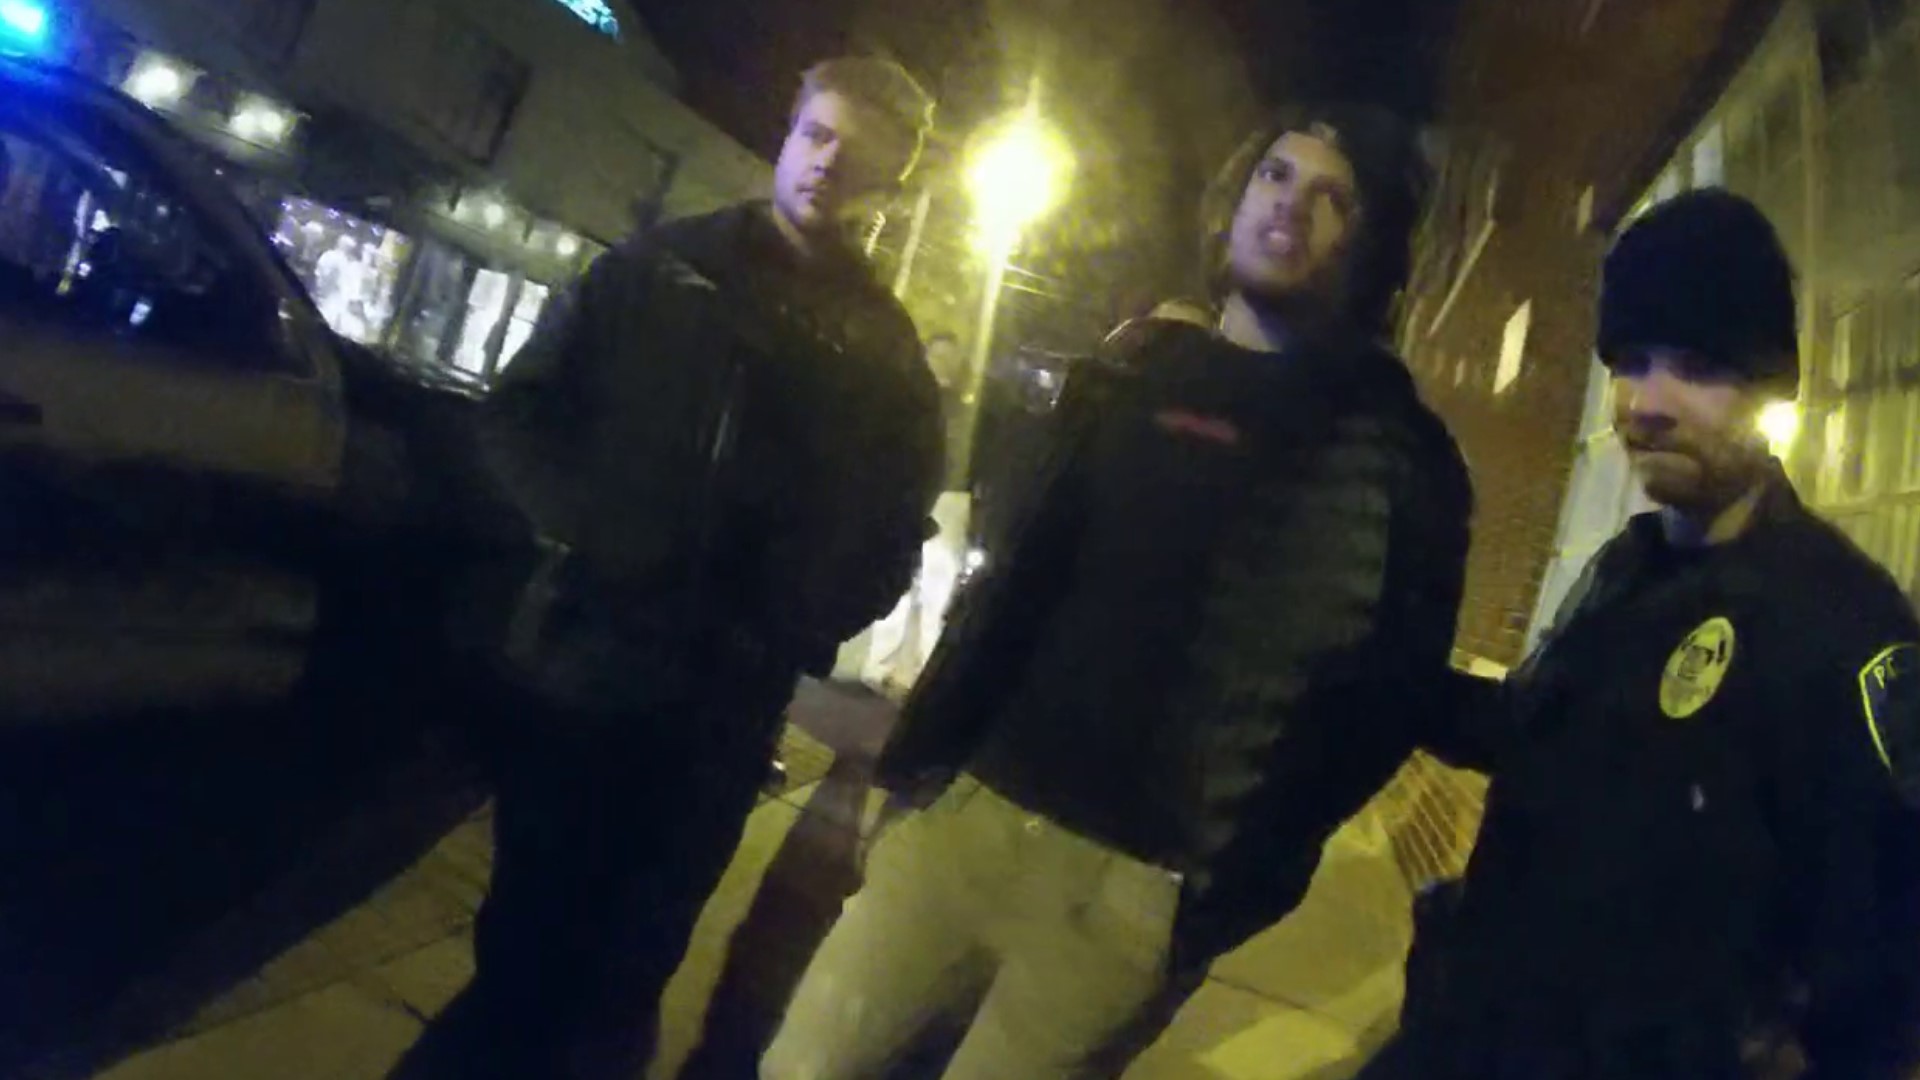 Fayetteville police have released the bodycam footage of the arrest of Myles Slusher and Anthony Brown who were charged with disorderly conduct on Nov. 6.